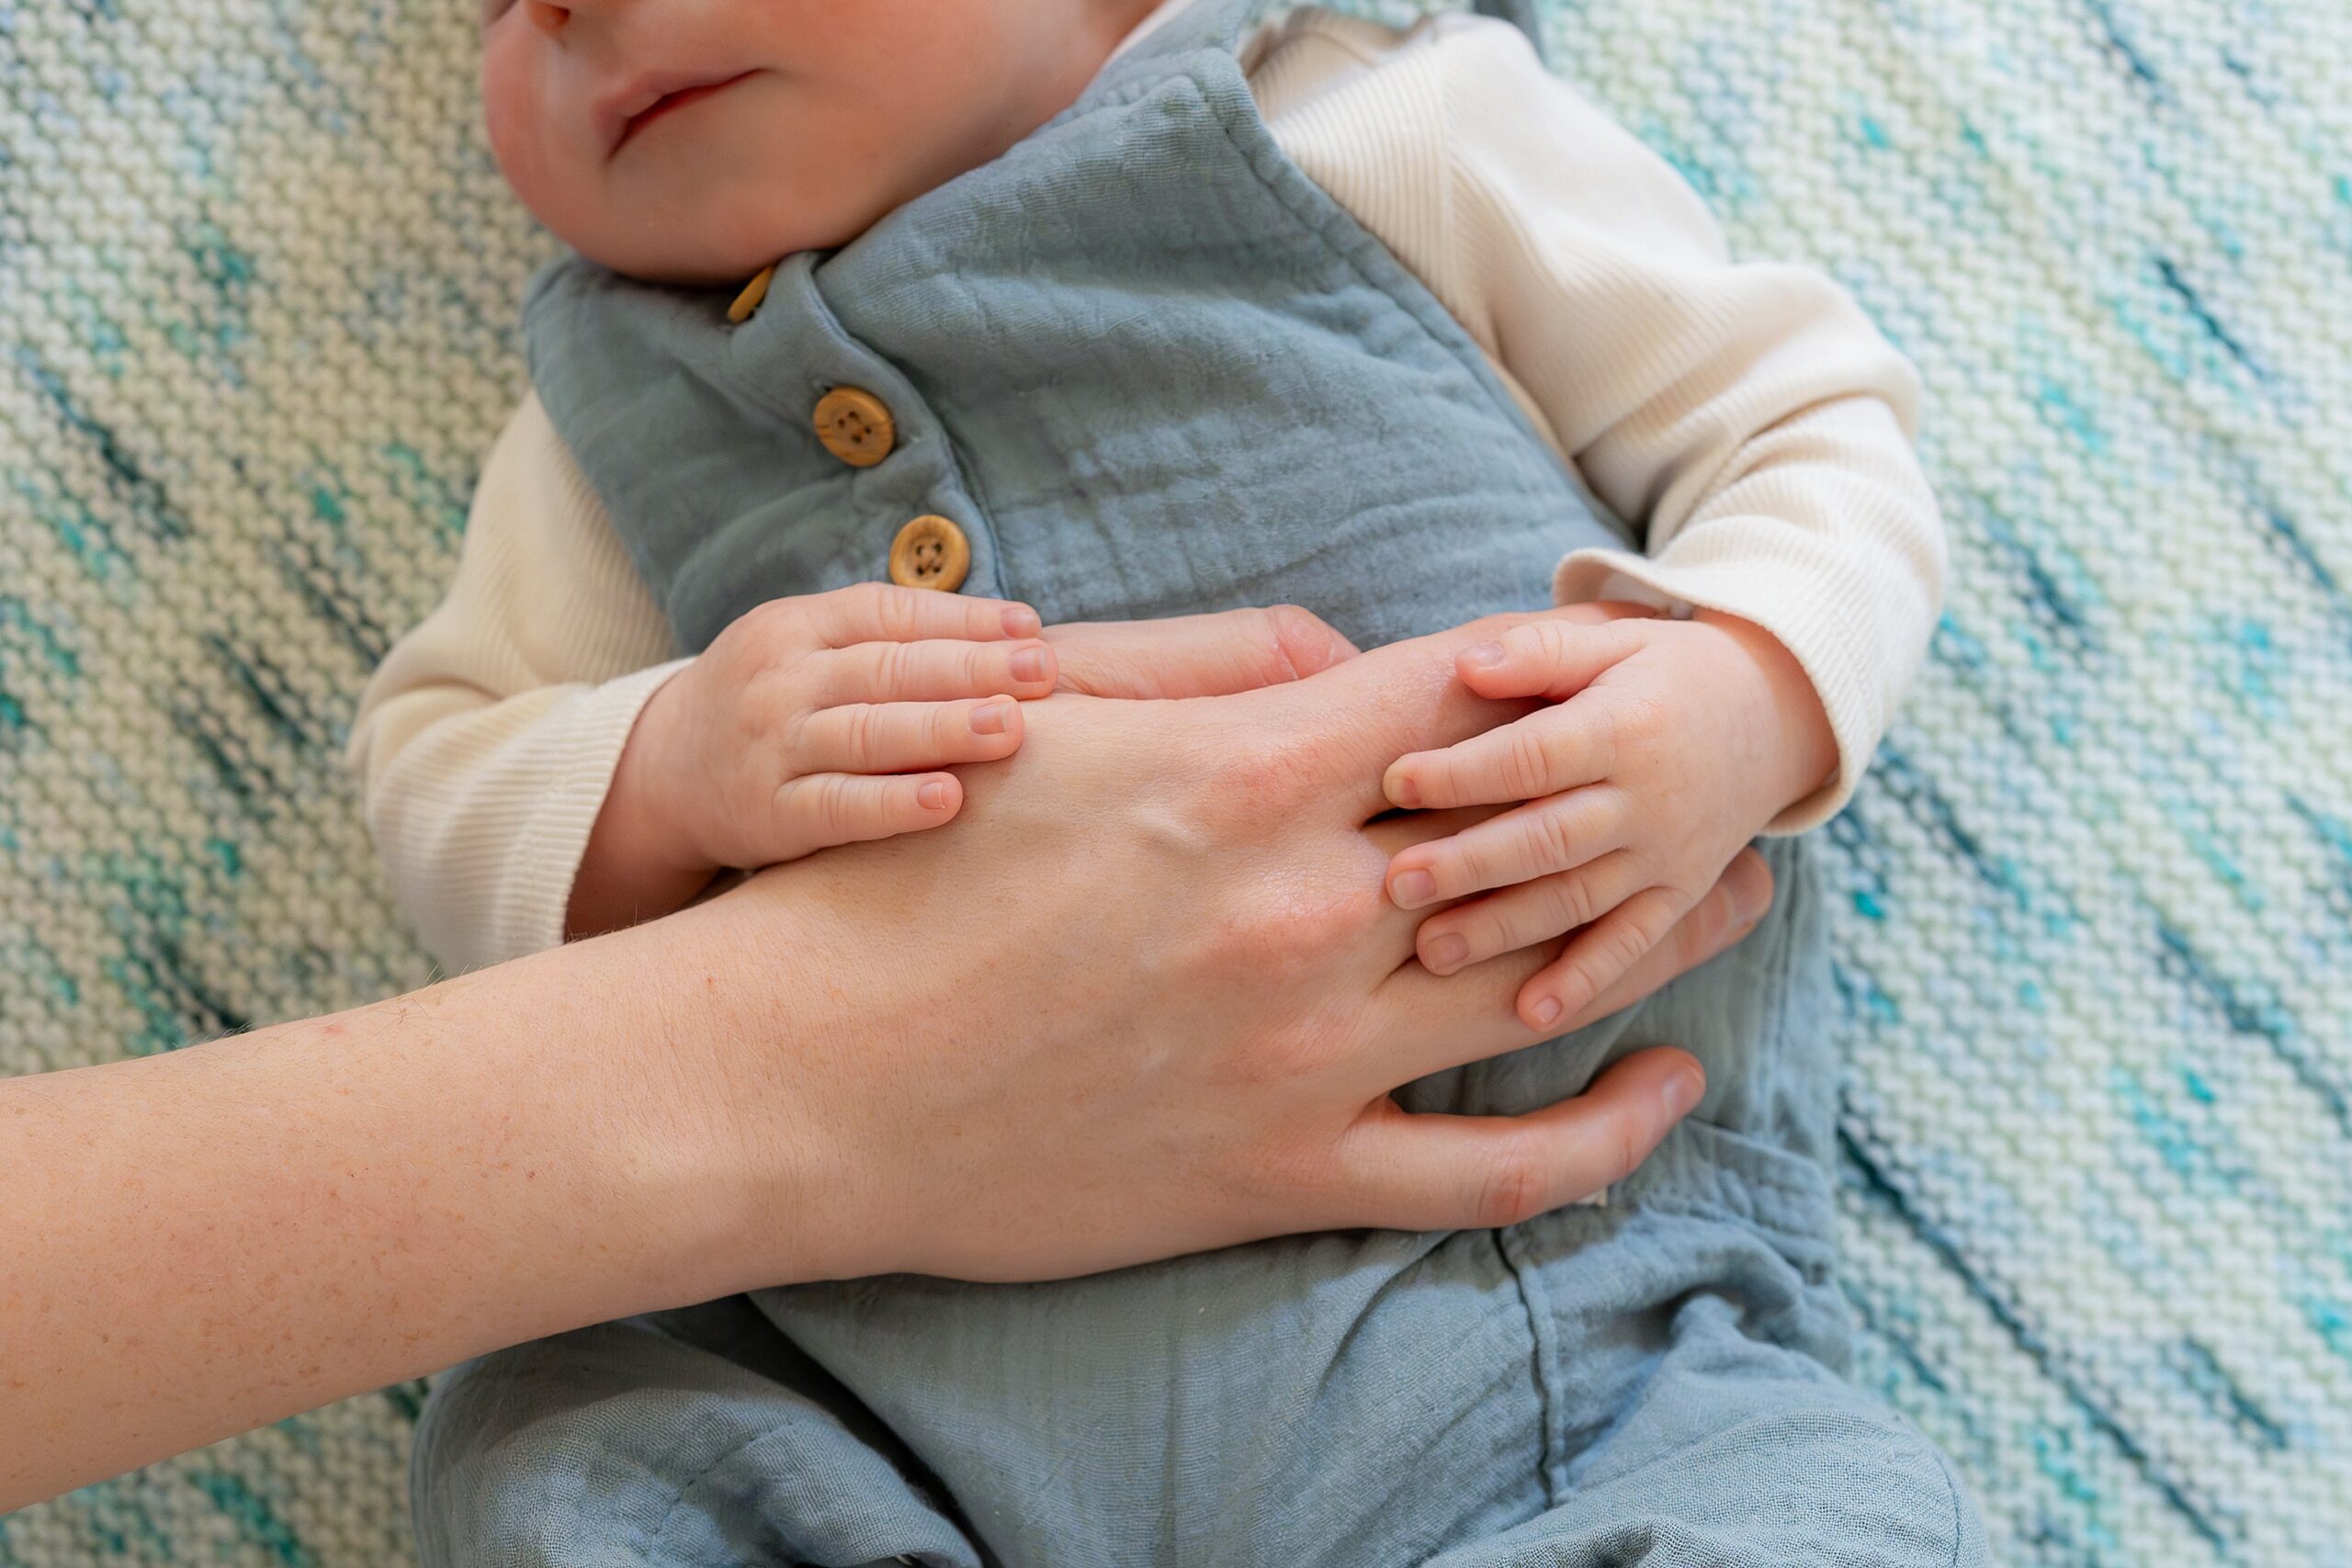 An adult's hands gently cradle a sleeping baby dressed in a blue outfit.